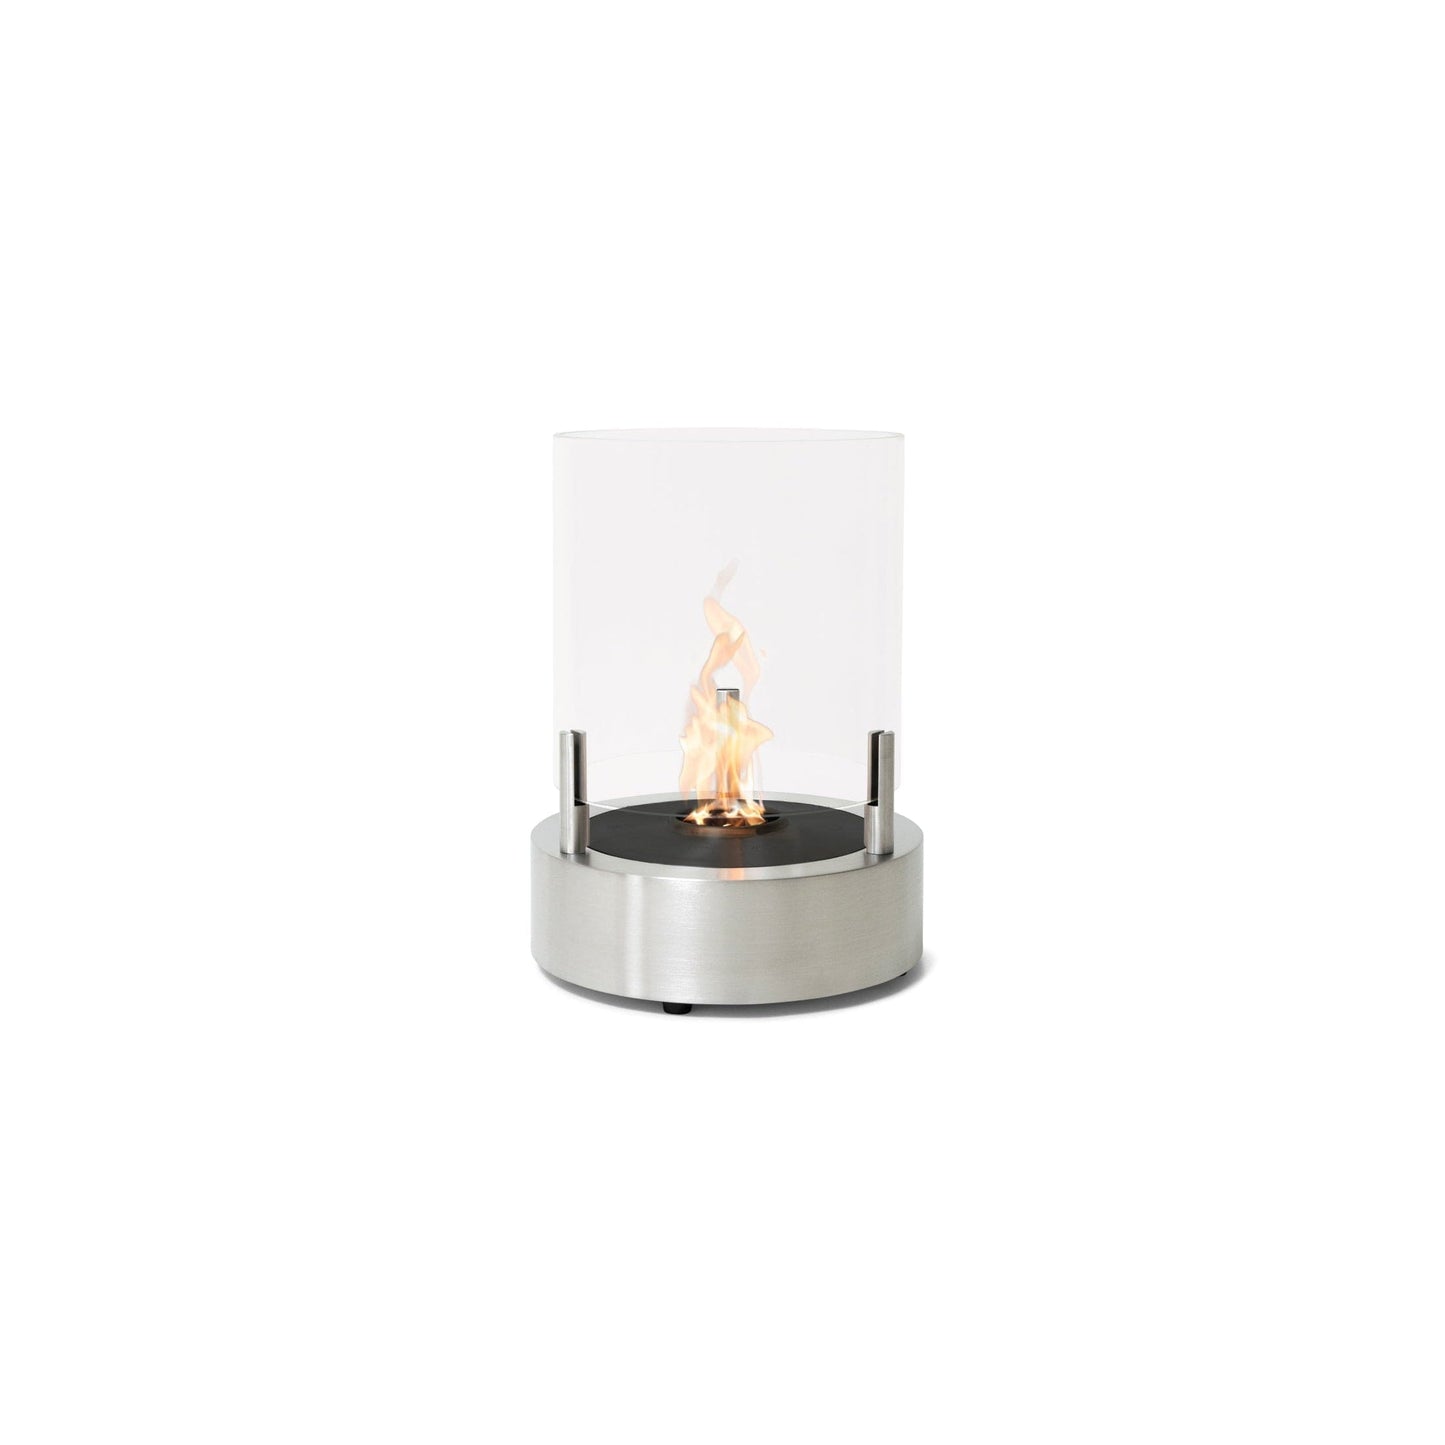 EcoSmart Fire T-Lite 3 18" Stainless Steel Freestanding Designer Fireplace with Black Burner by MAD Design Group